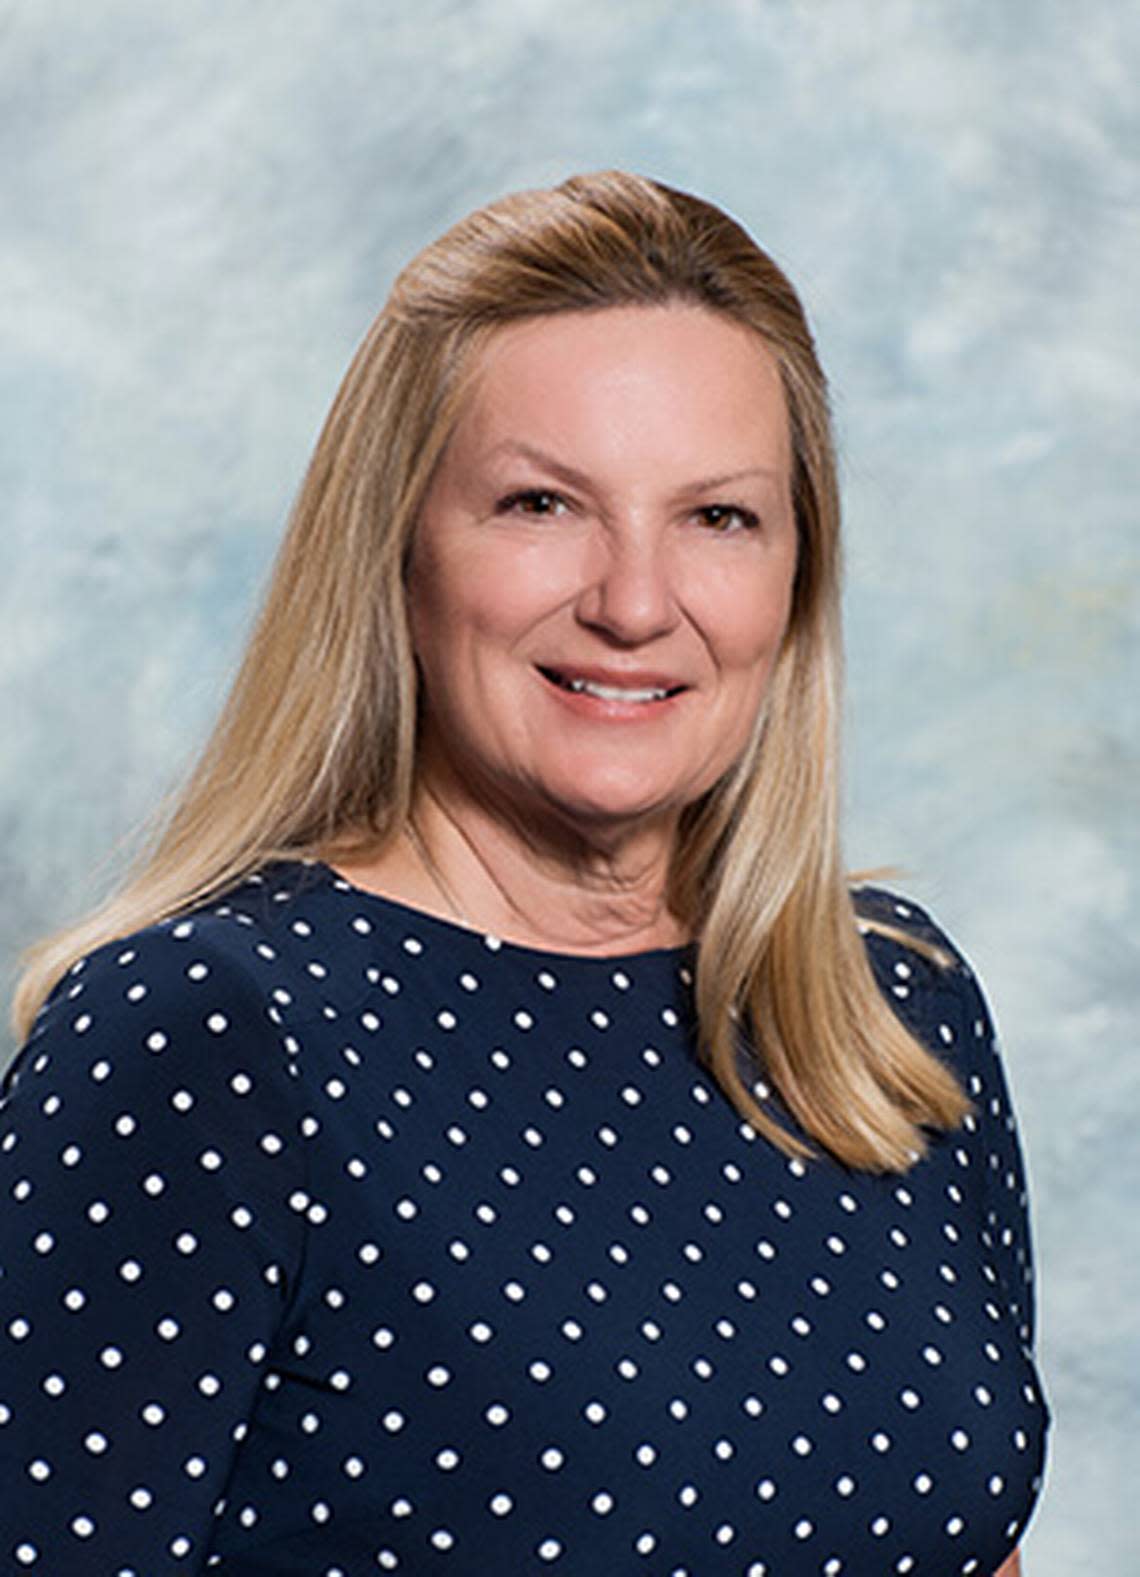 Tamara Becker, as pictured in her headshot on the Hilton Head Island website, has served on Town Council since 2018.